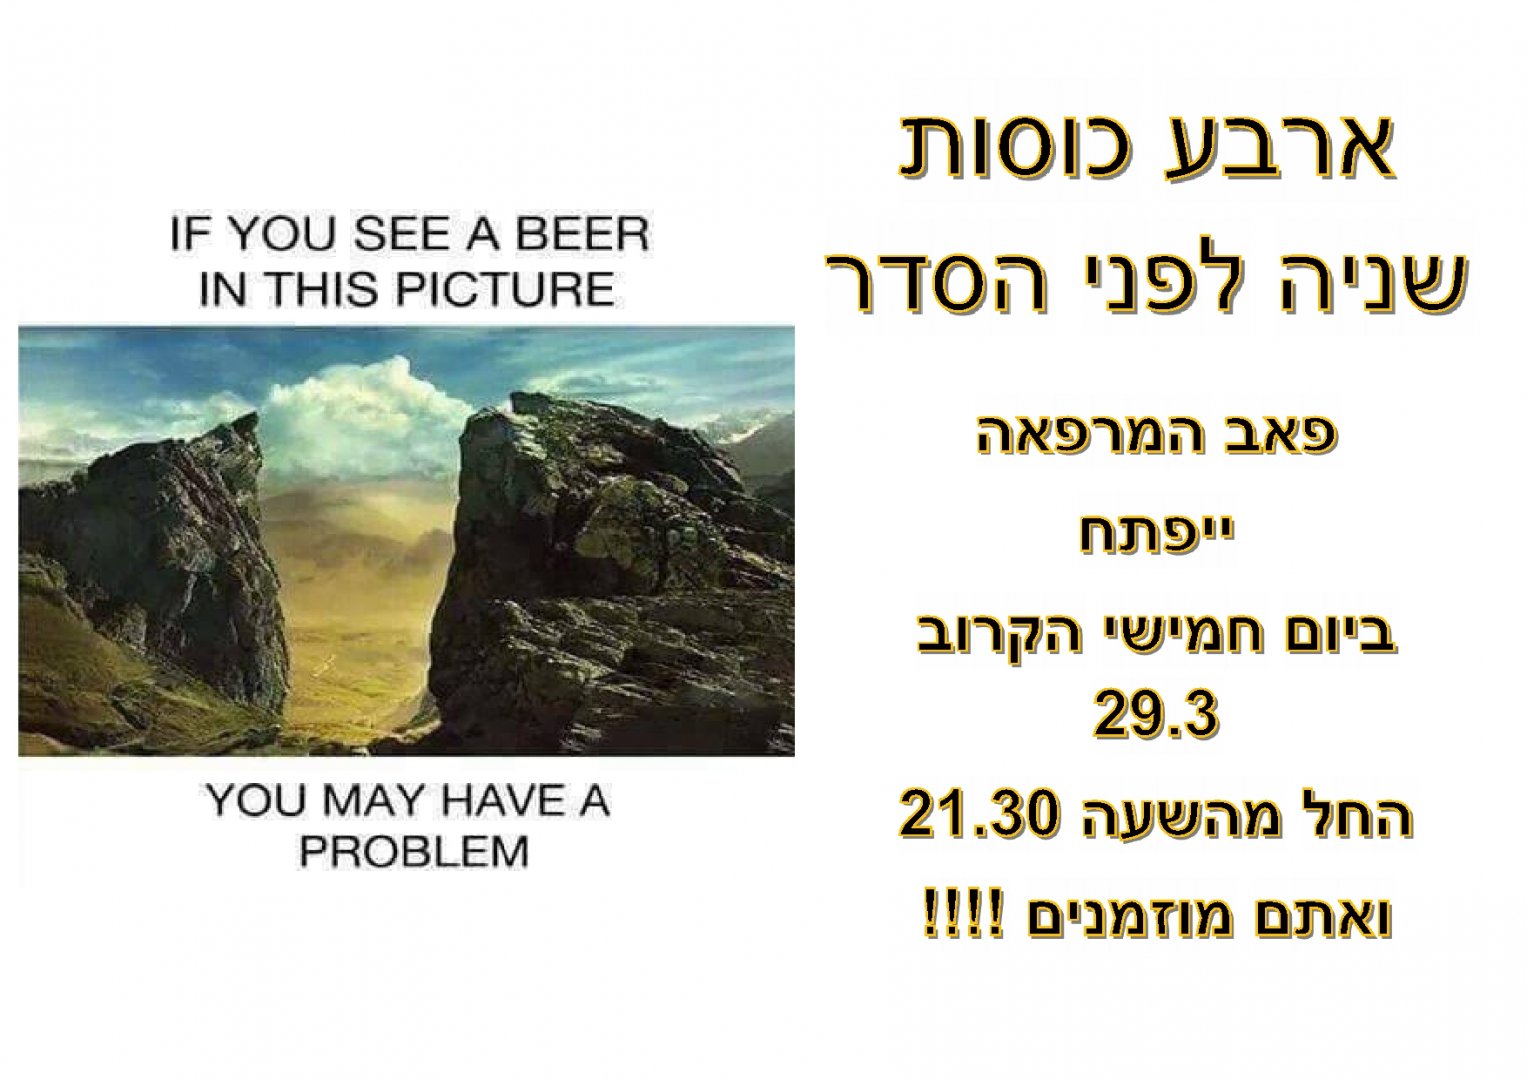 Before Pesach 3.29